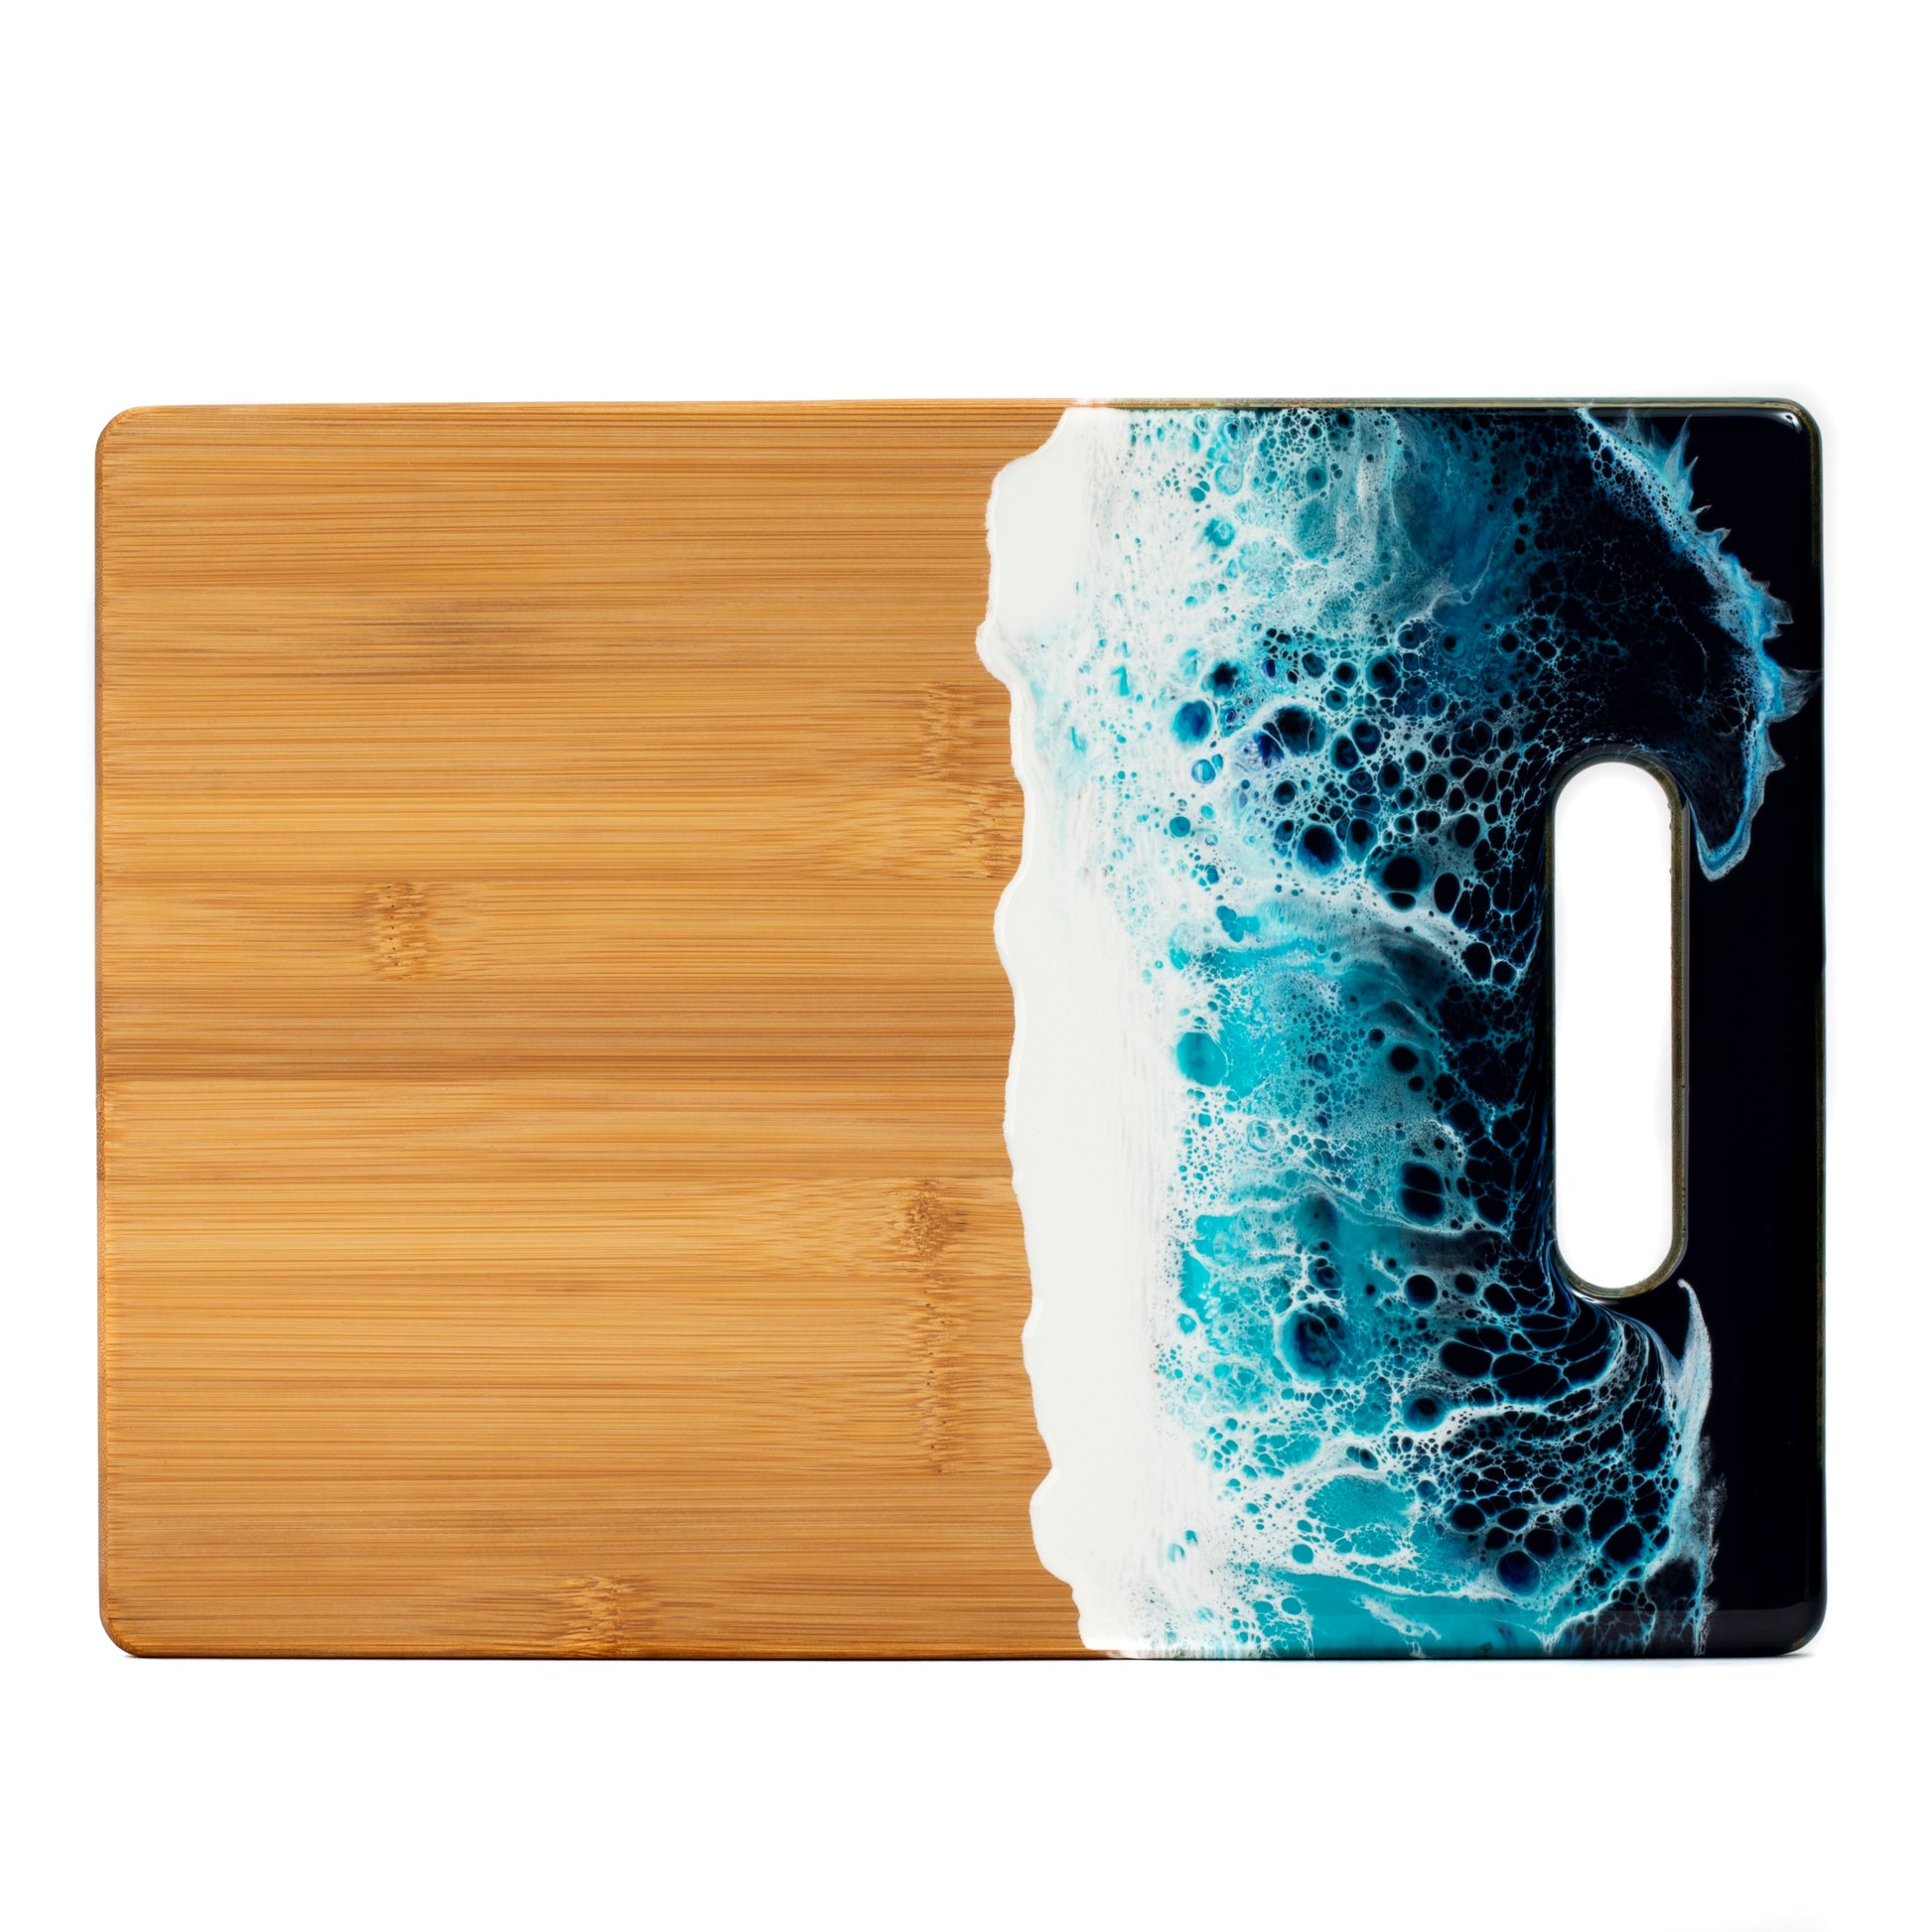 Ocean Wave Resin Serving Board, Surfboard Shaped Cutting Board, Bamboo,  Turquoise Epoxy Resin Waves, Cheese Board, Surf Tray 